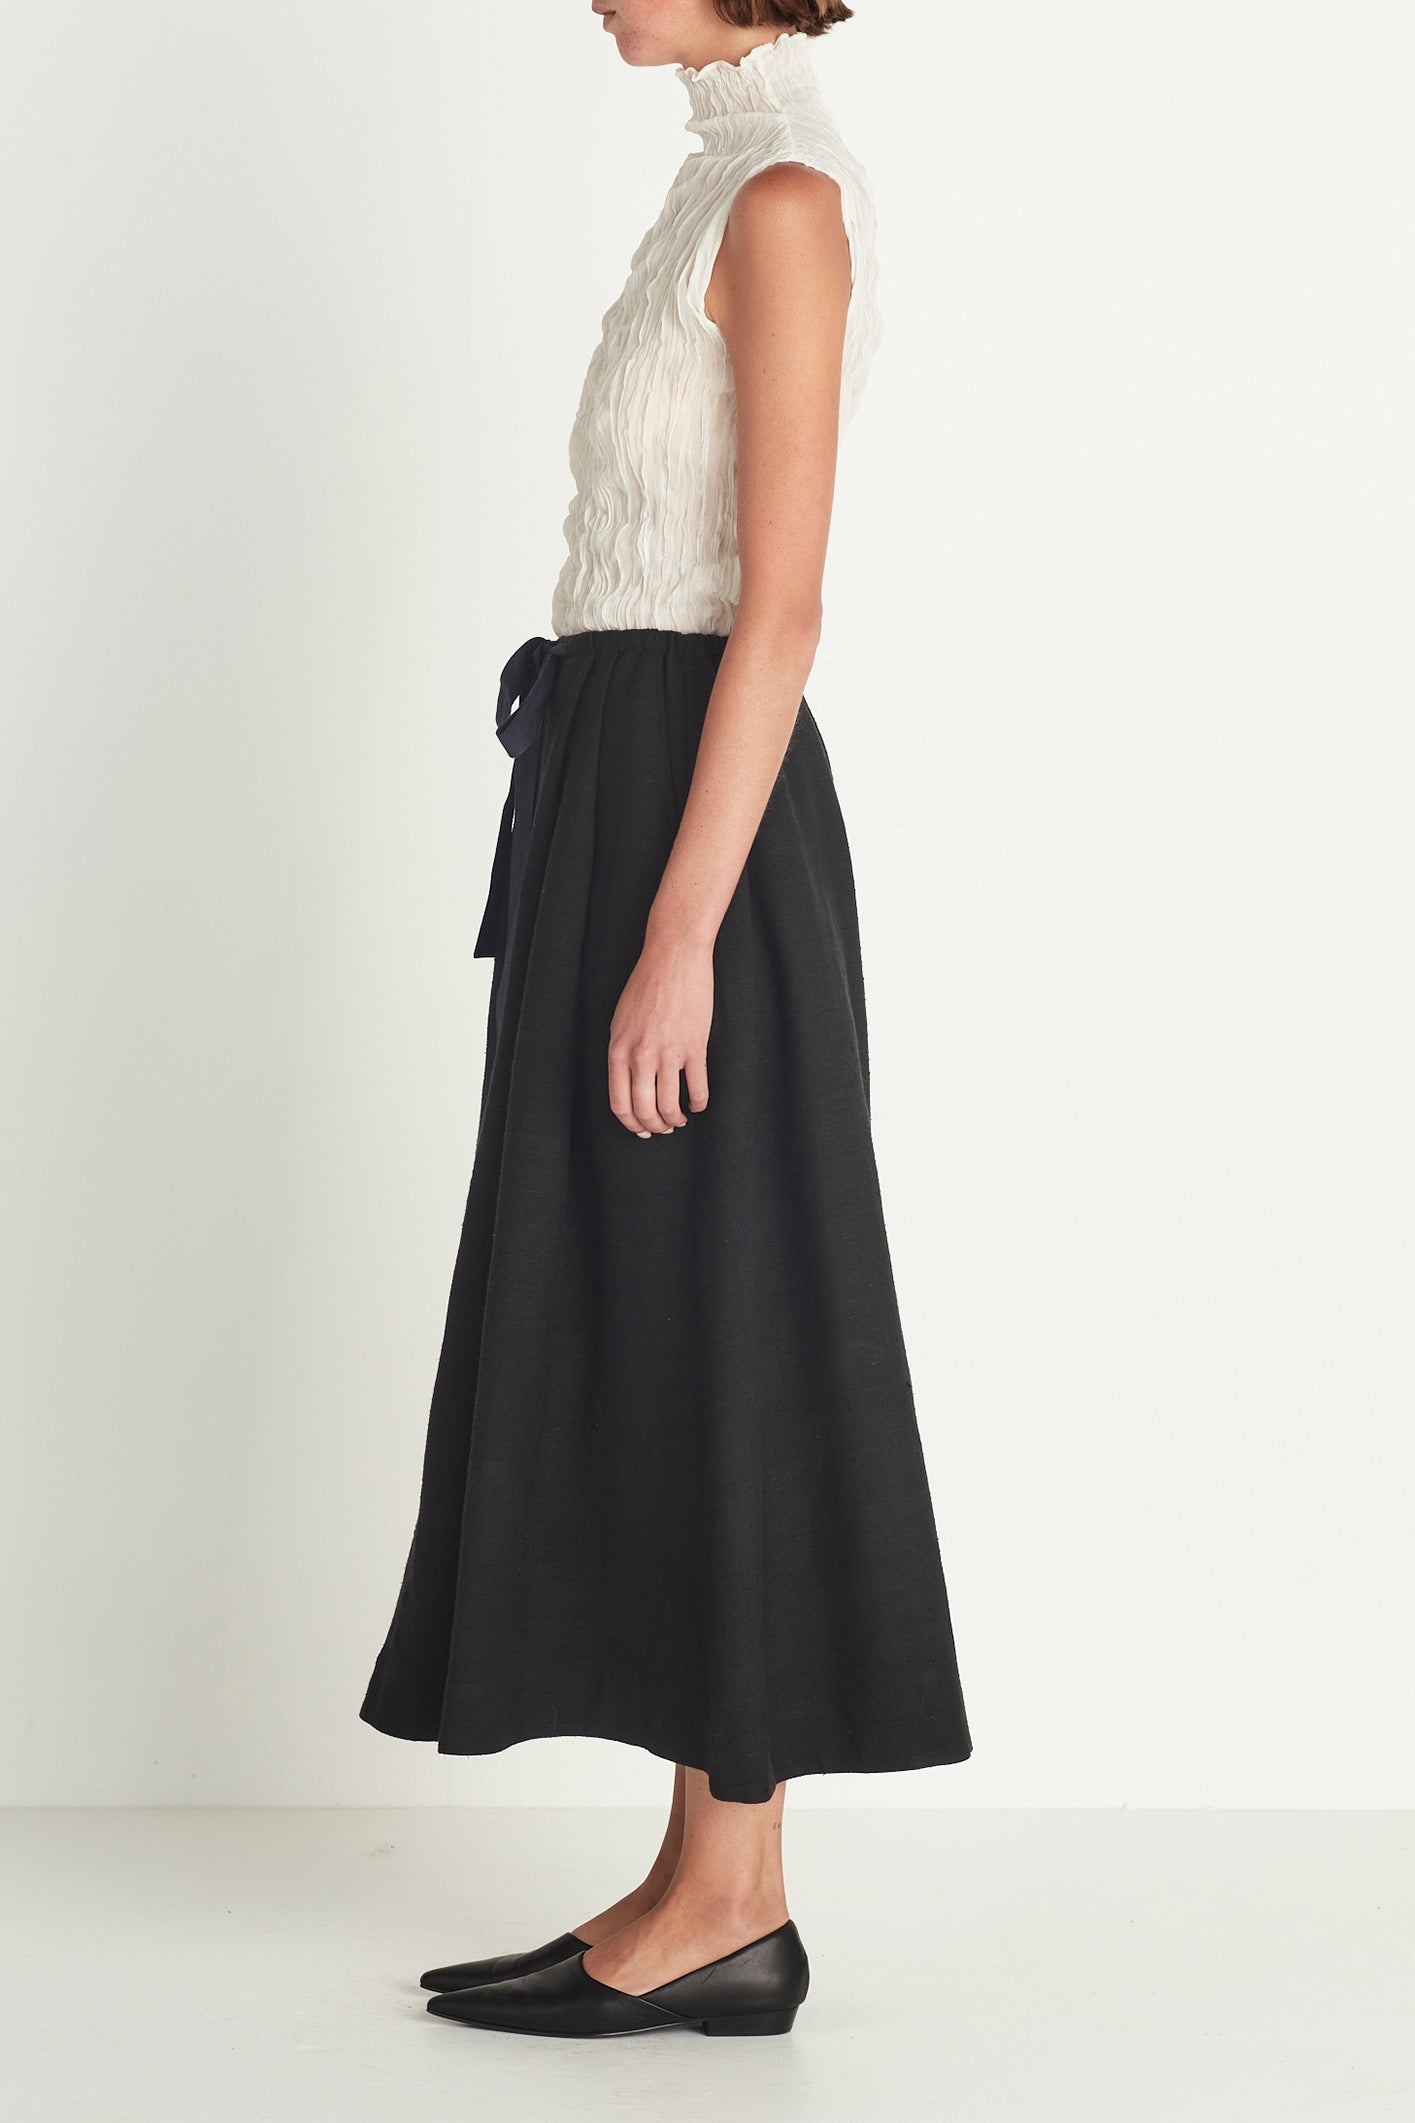 The Relaxed Rebuild Skirt